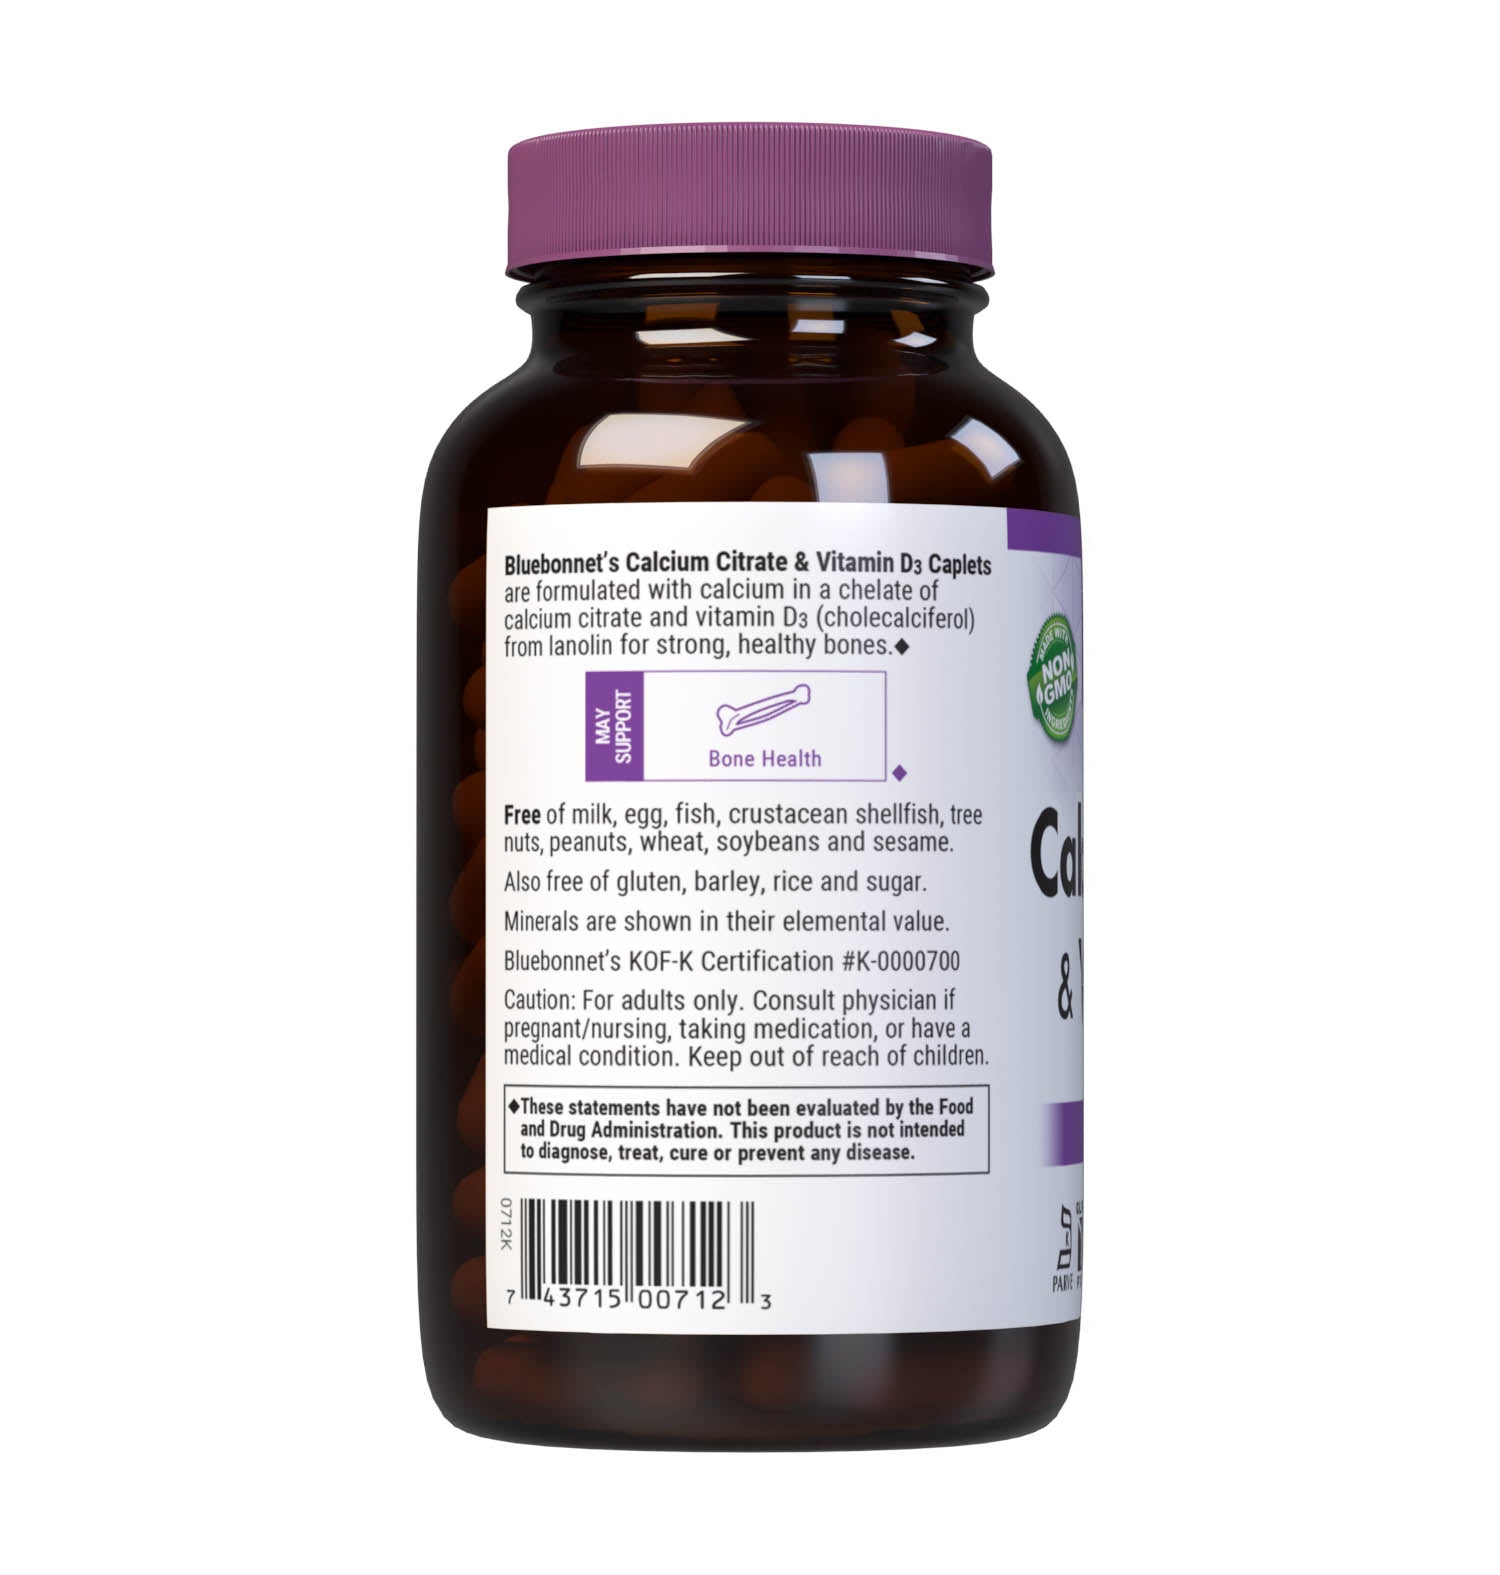 Bluebonnet's Calcium Citrate and Vitamin D3 180 Caplets are formulated with calcium in a chelate of calcium citrate and vitamin D3 (cholecalciferol) from lanolin for strong, healthy bones. Description panel. #size_180 count